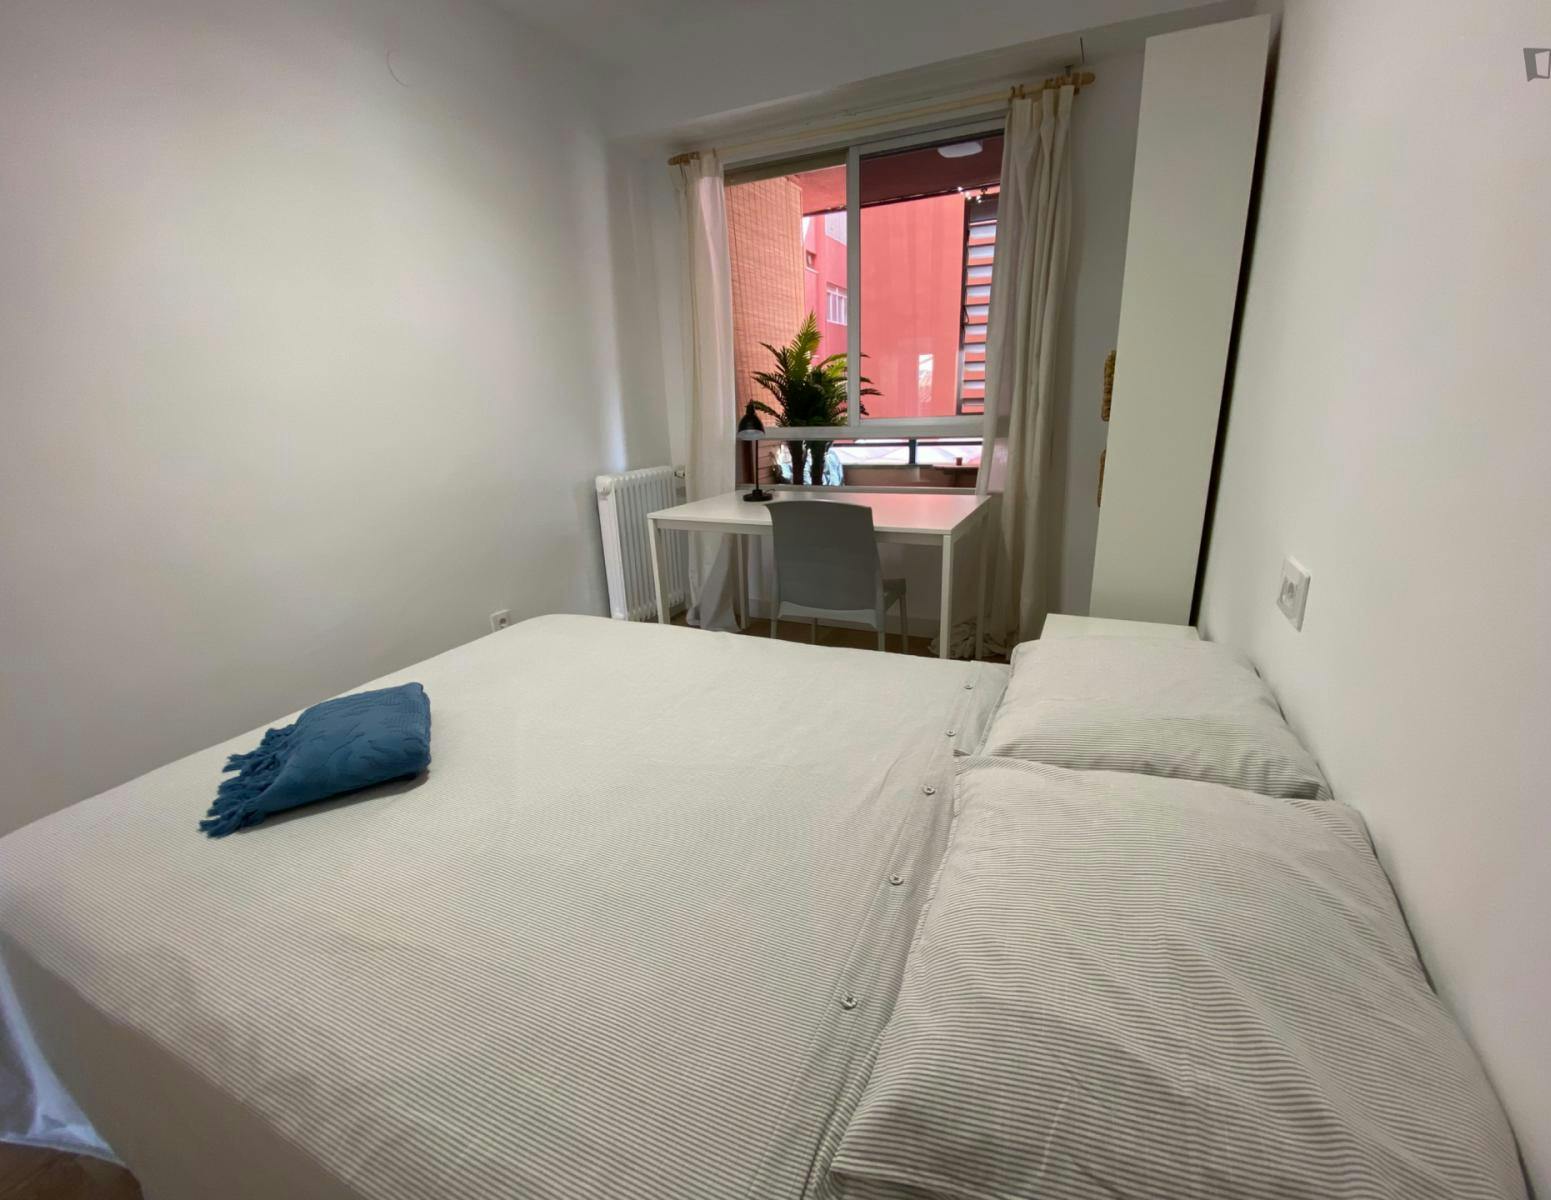 GREAT COMFORTABLE Bedroom in UPMOST CENTRAL and RENOVATED Apartment